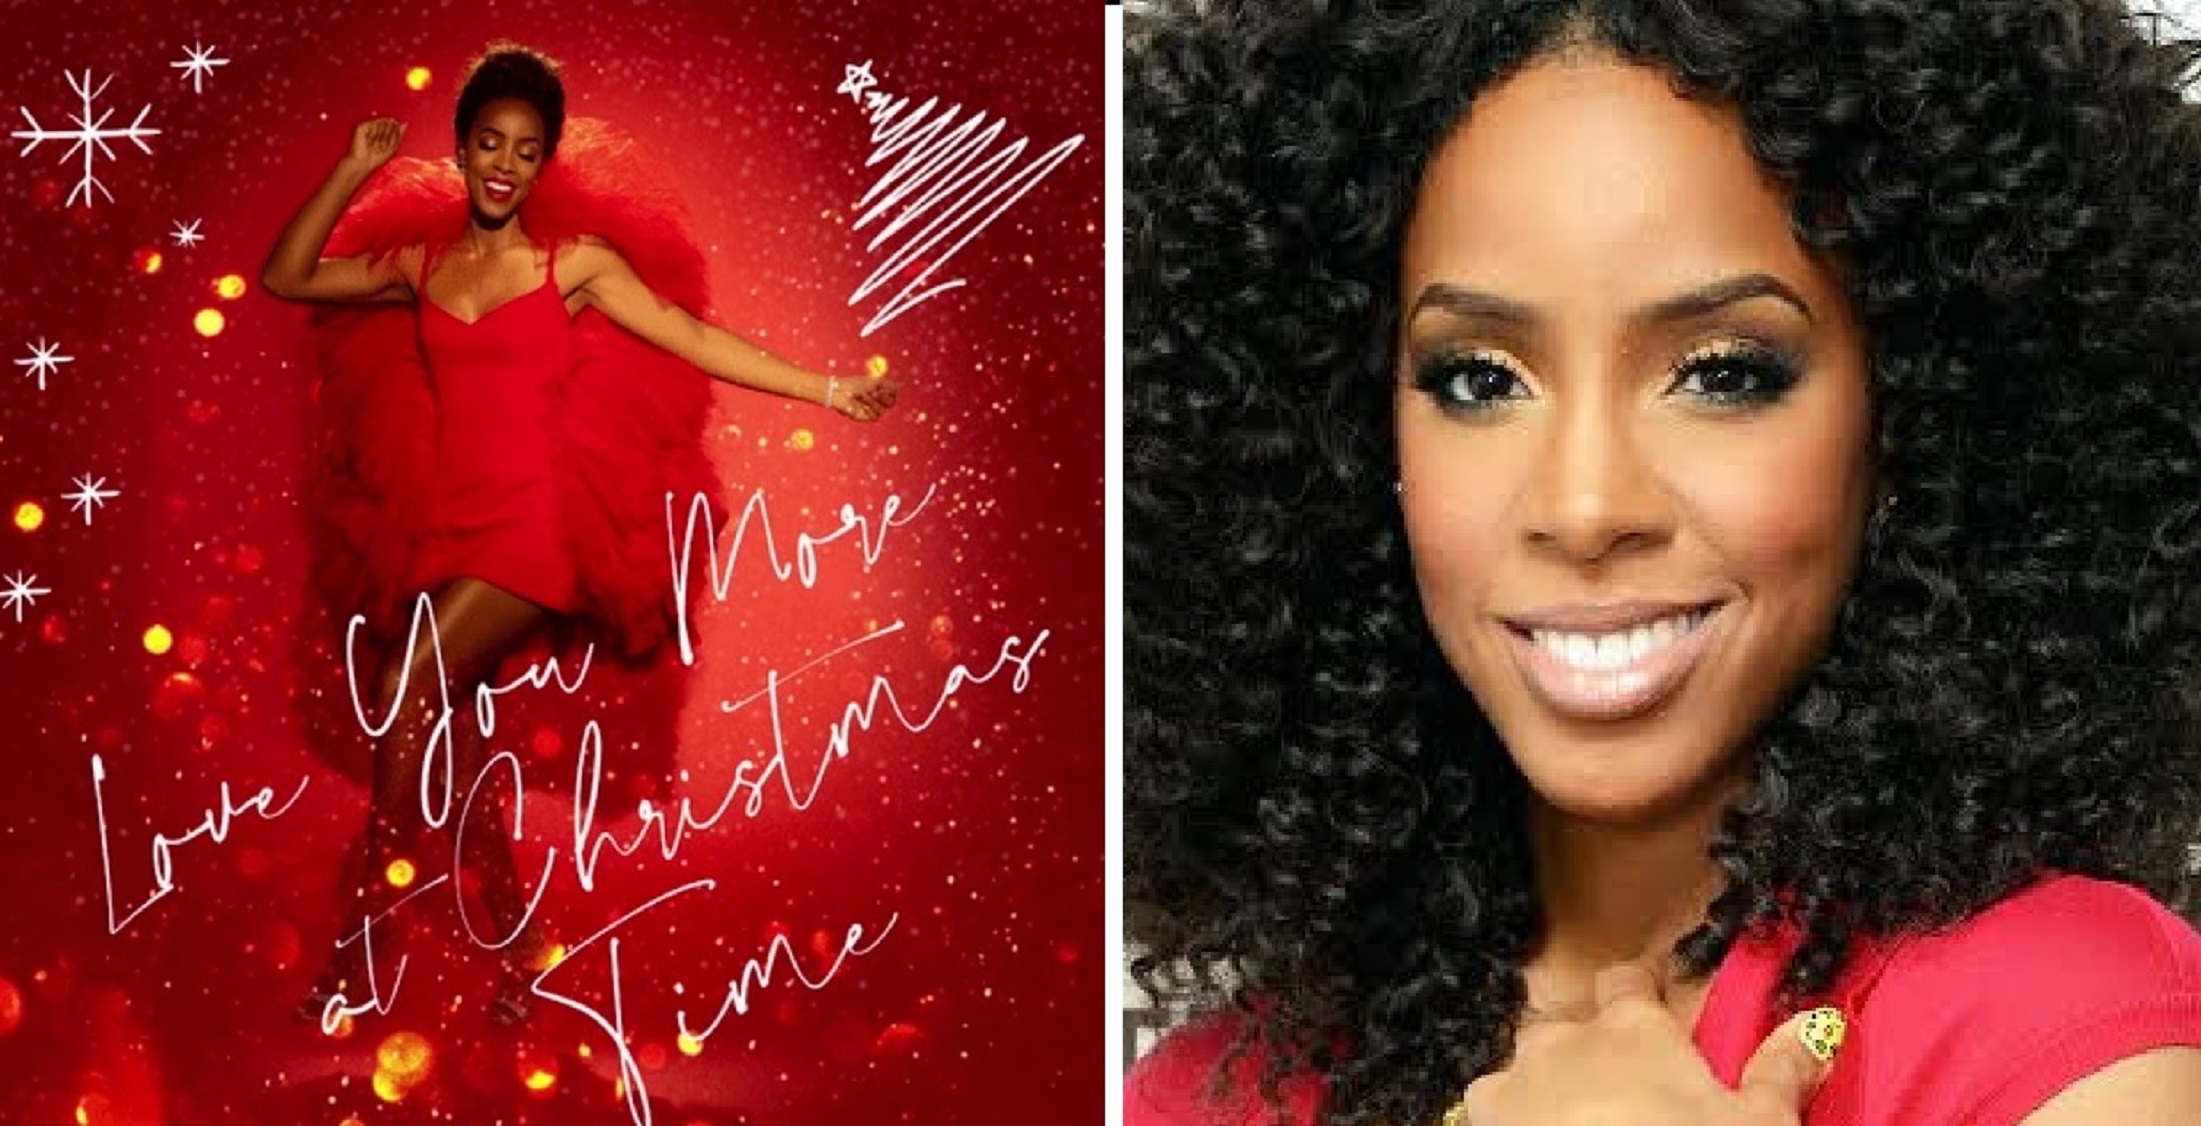 Kelly Rowland Releases New Christmas Song, ‘Love You More At Christmas’ – Listen Here!